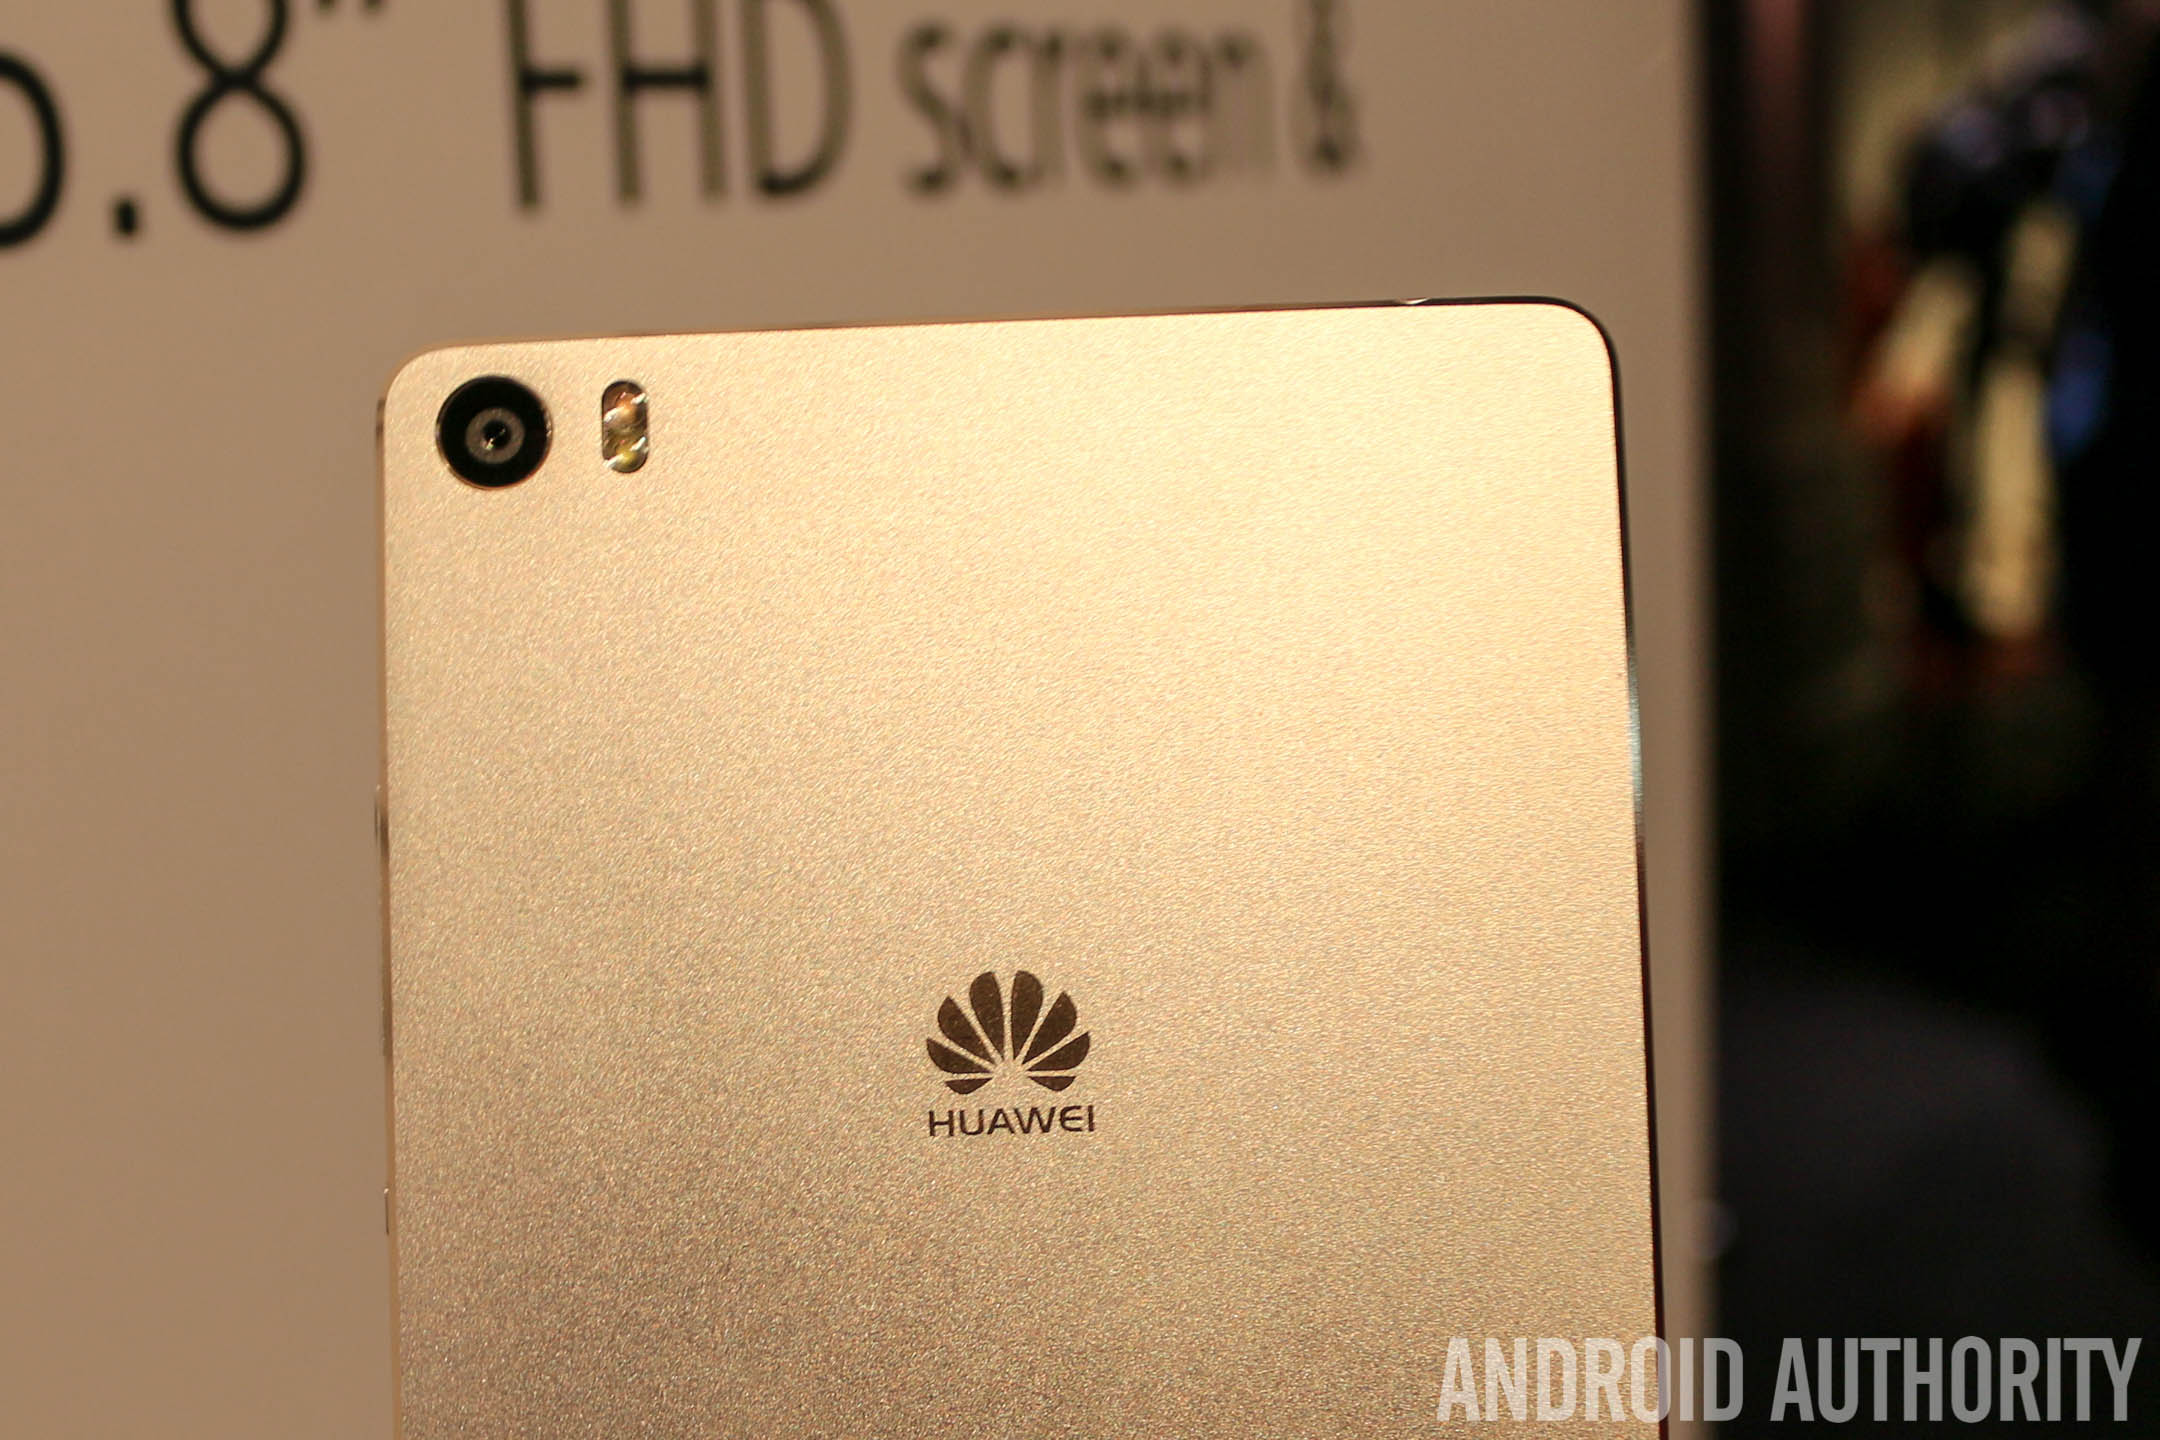 Gespierd Verheugen kapok Hands-on with the humongous HUAWEI P8 Max - Android Authority